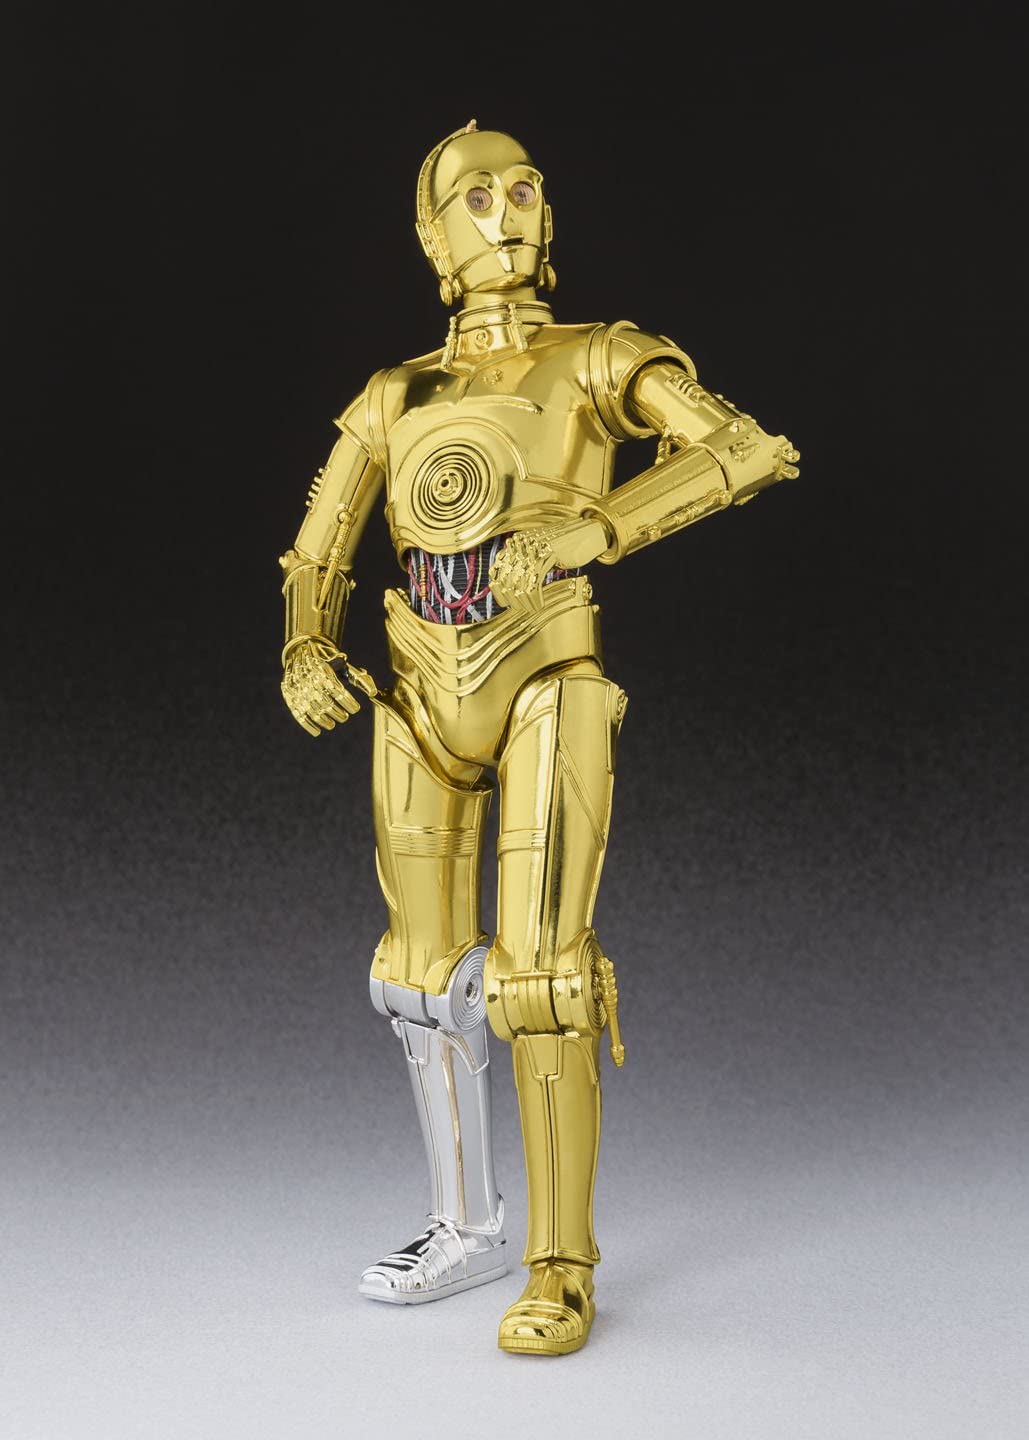 SHFiguarts Star Wars C-3PO (A NEW HOPE) Approximately 155mm ABS